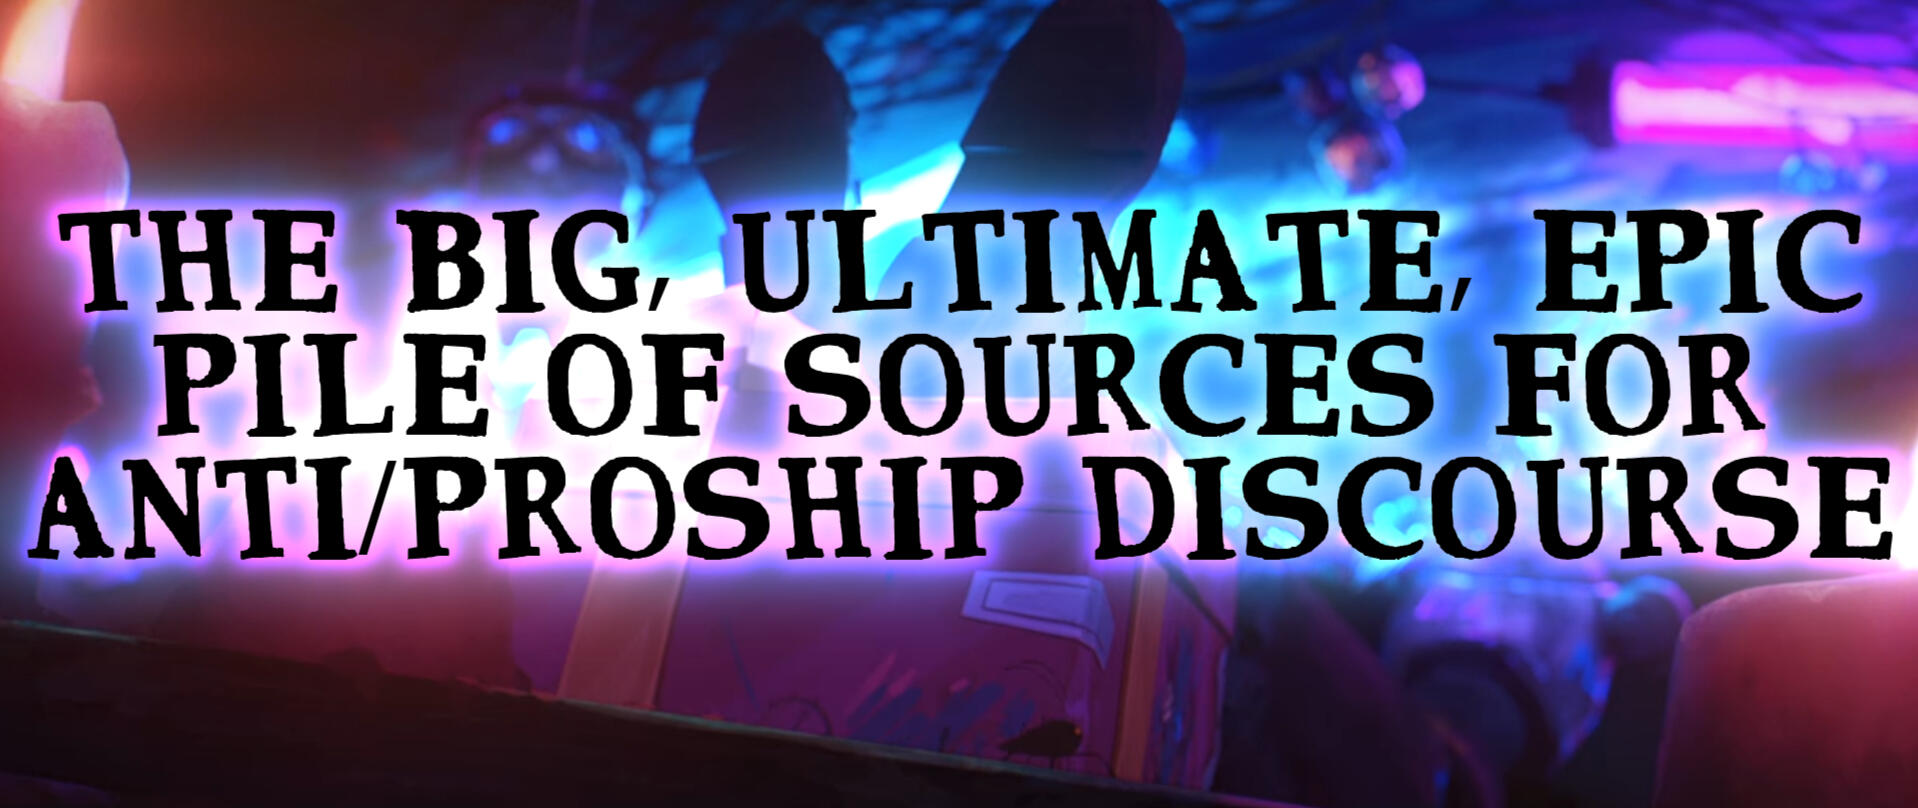 Big black capital letters that say, "THE BIG, ULTIMATE, EPIC PILE OF SOURCES FOR ANTI/PROSHIP DISCOURSE". The background is a screenshot of Jinx's hideout from Arcane, specifically her dolls.